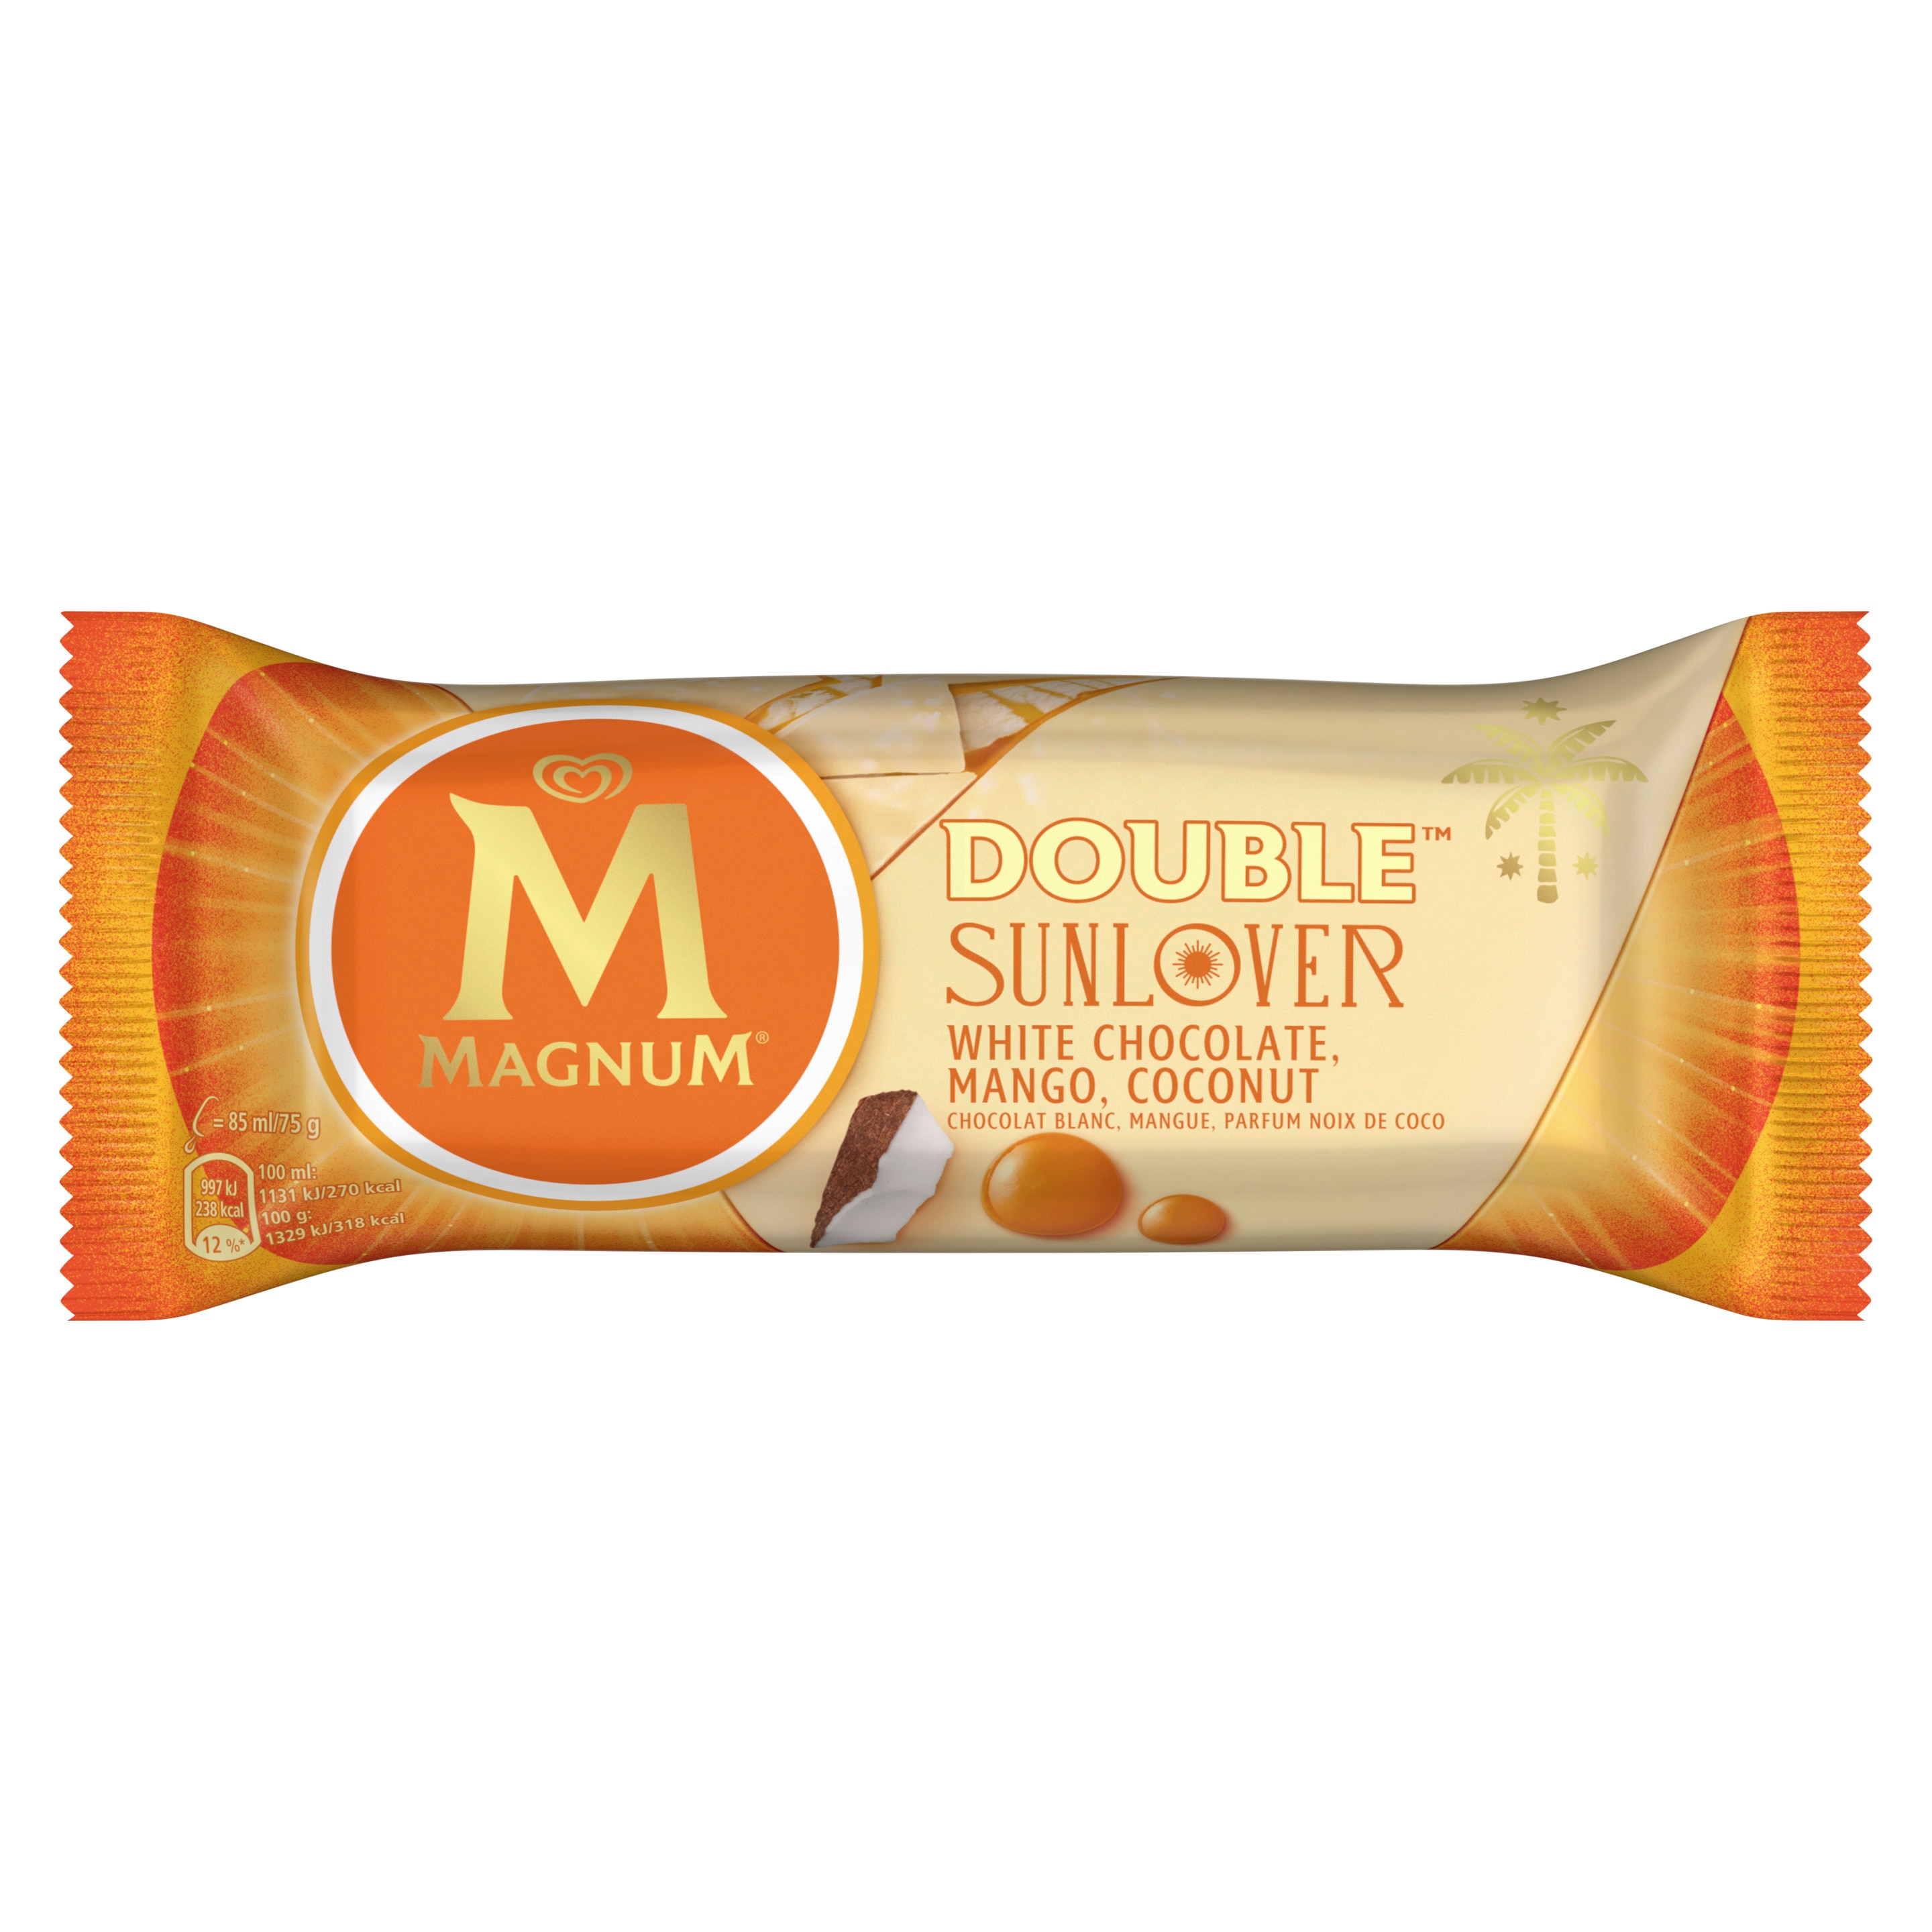 Magnum Double Sunlover x4